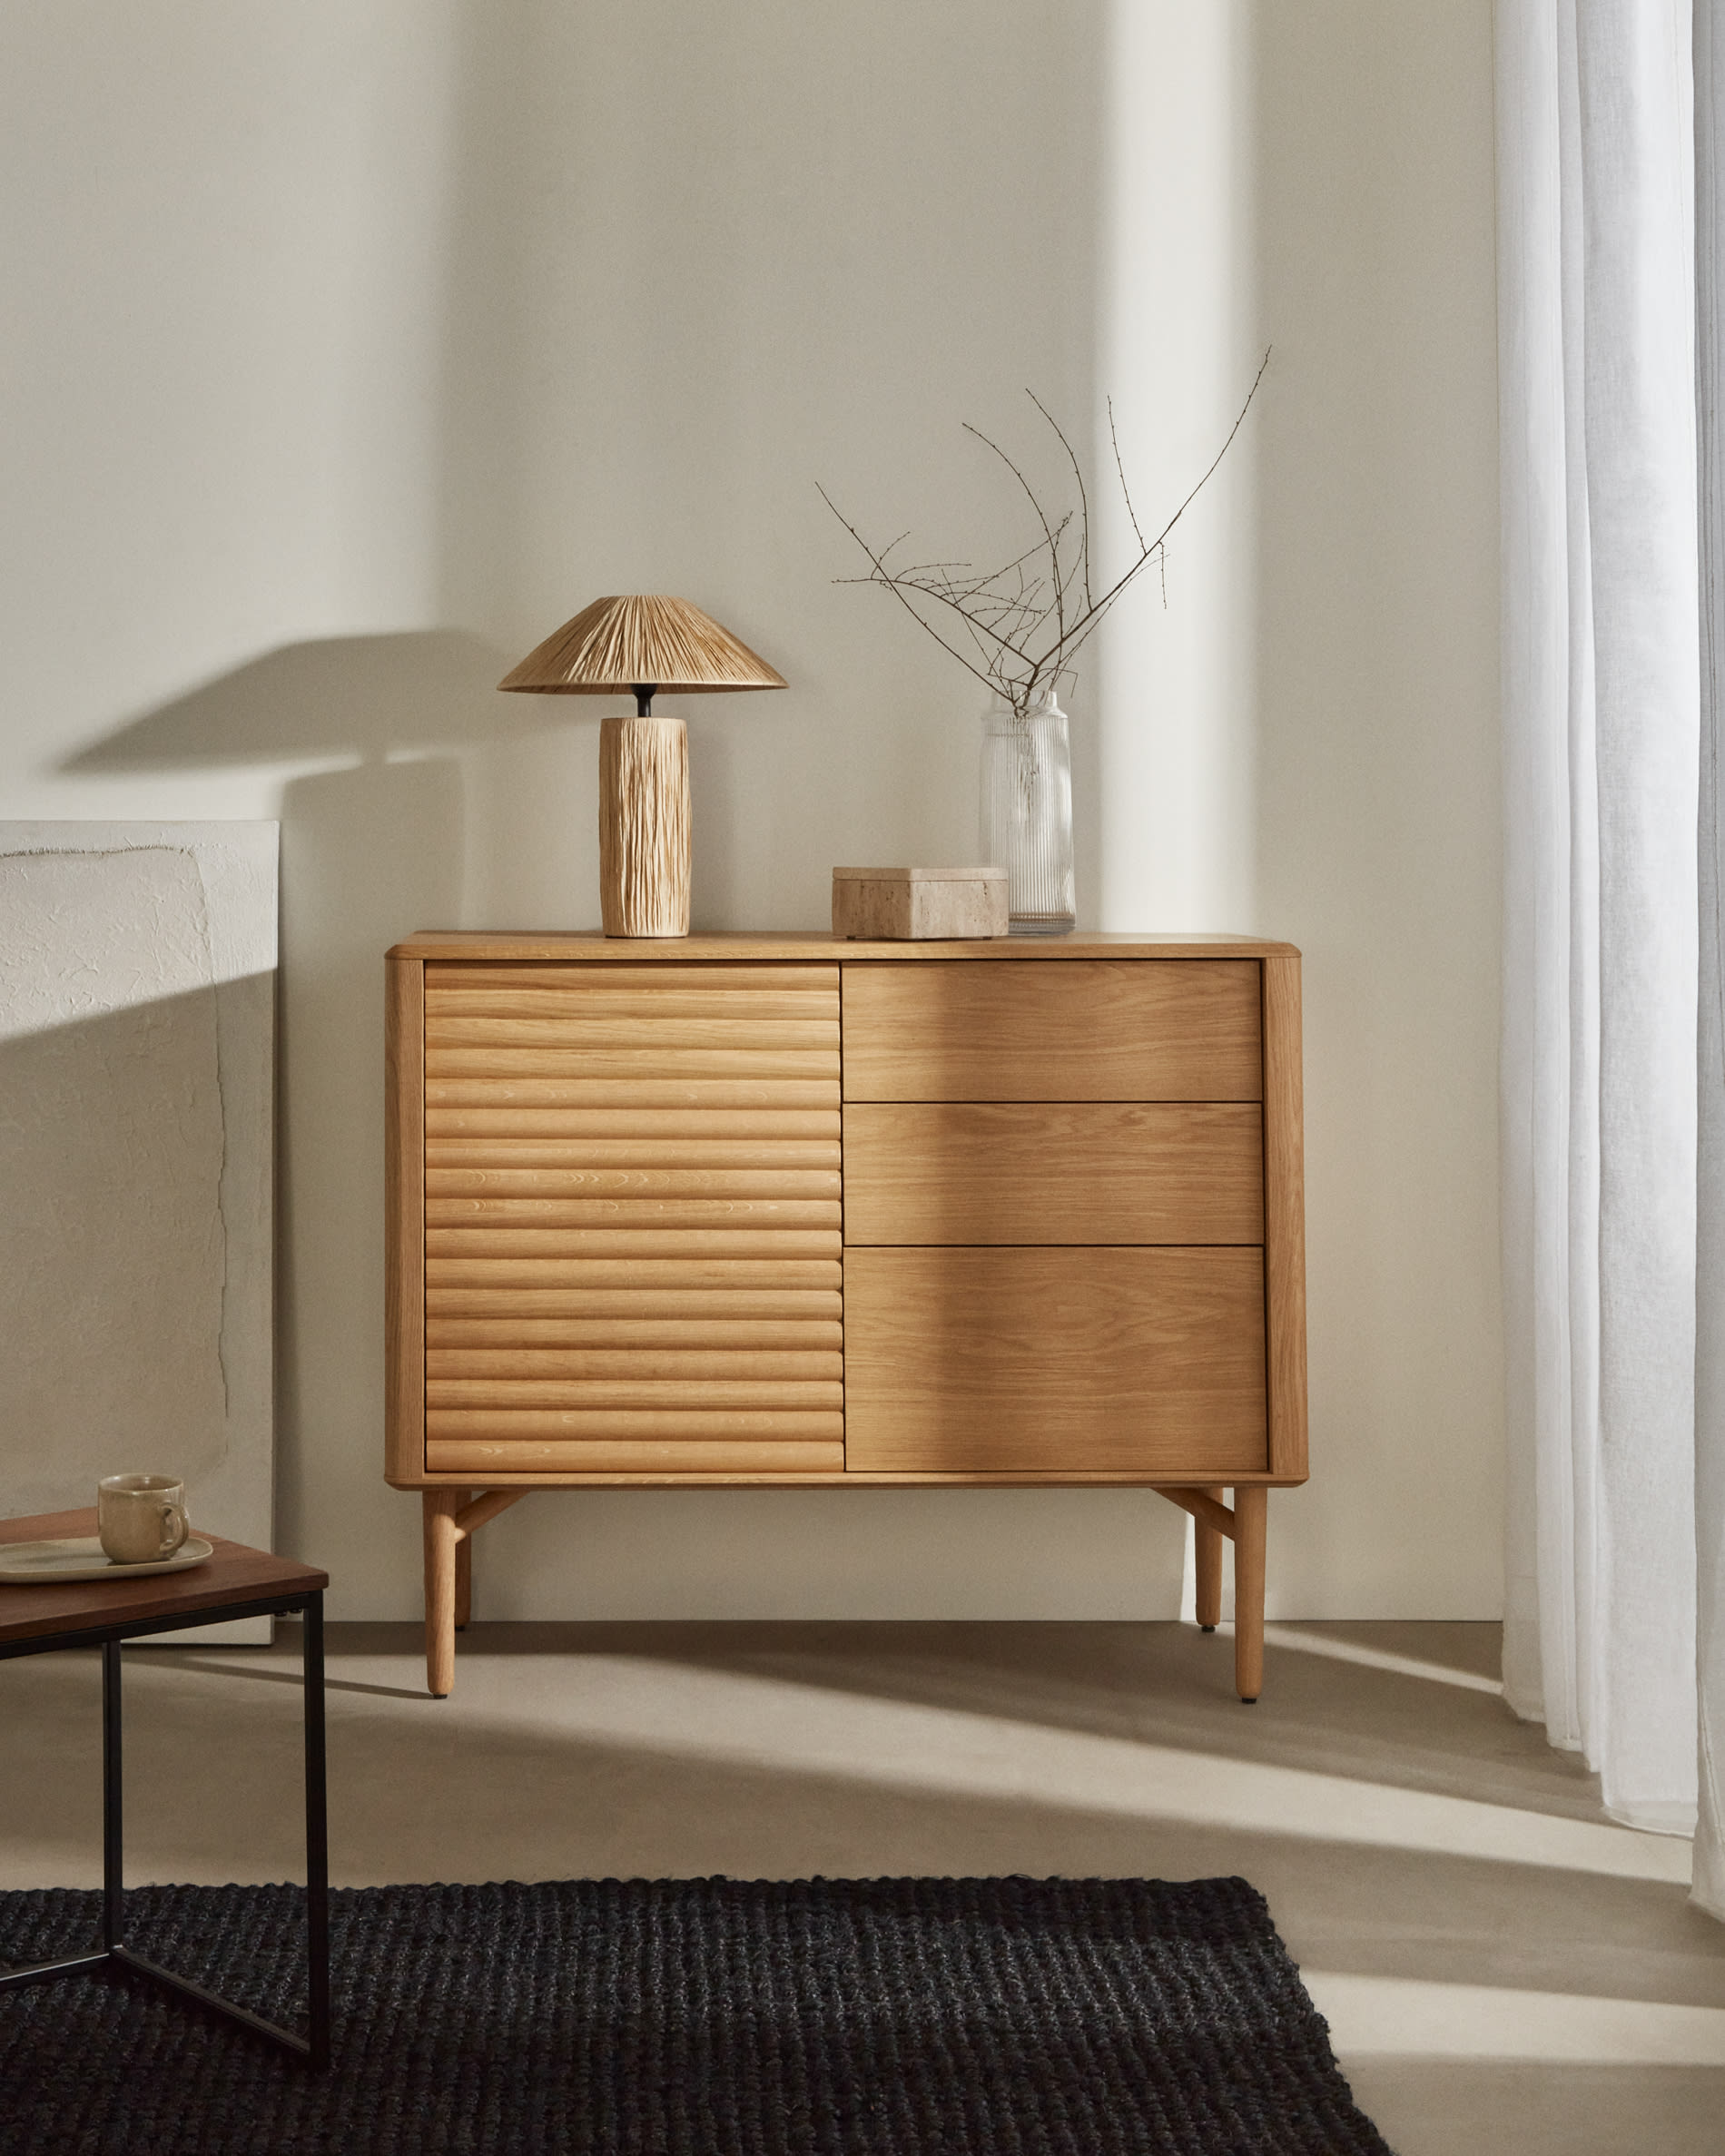 Lenon sideboard with 1 door and 3 drawers, made from oak wood and veneer, 105 x 85 cm FSC MIX Credit